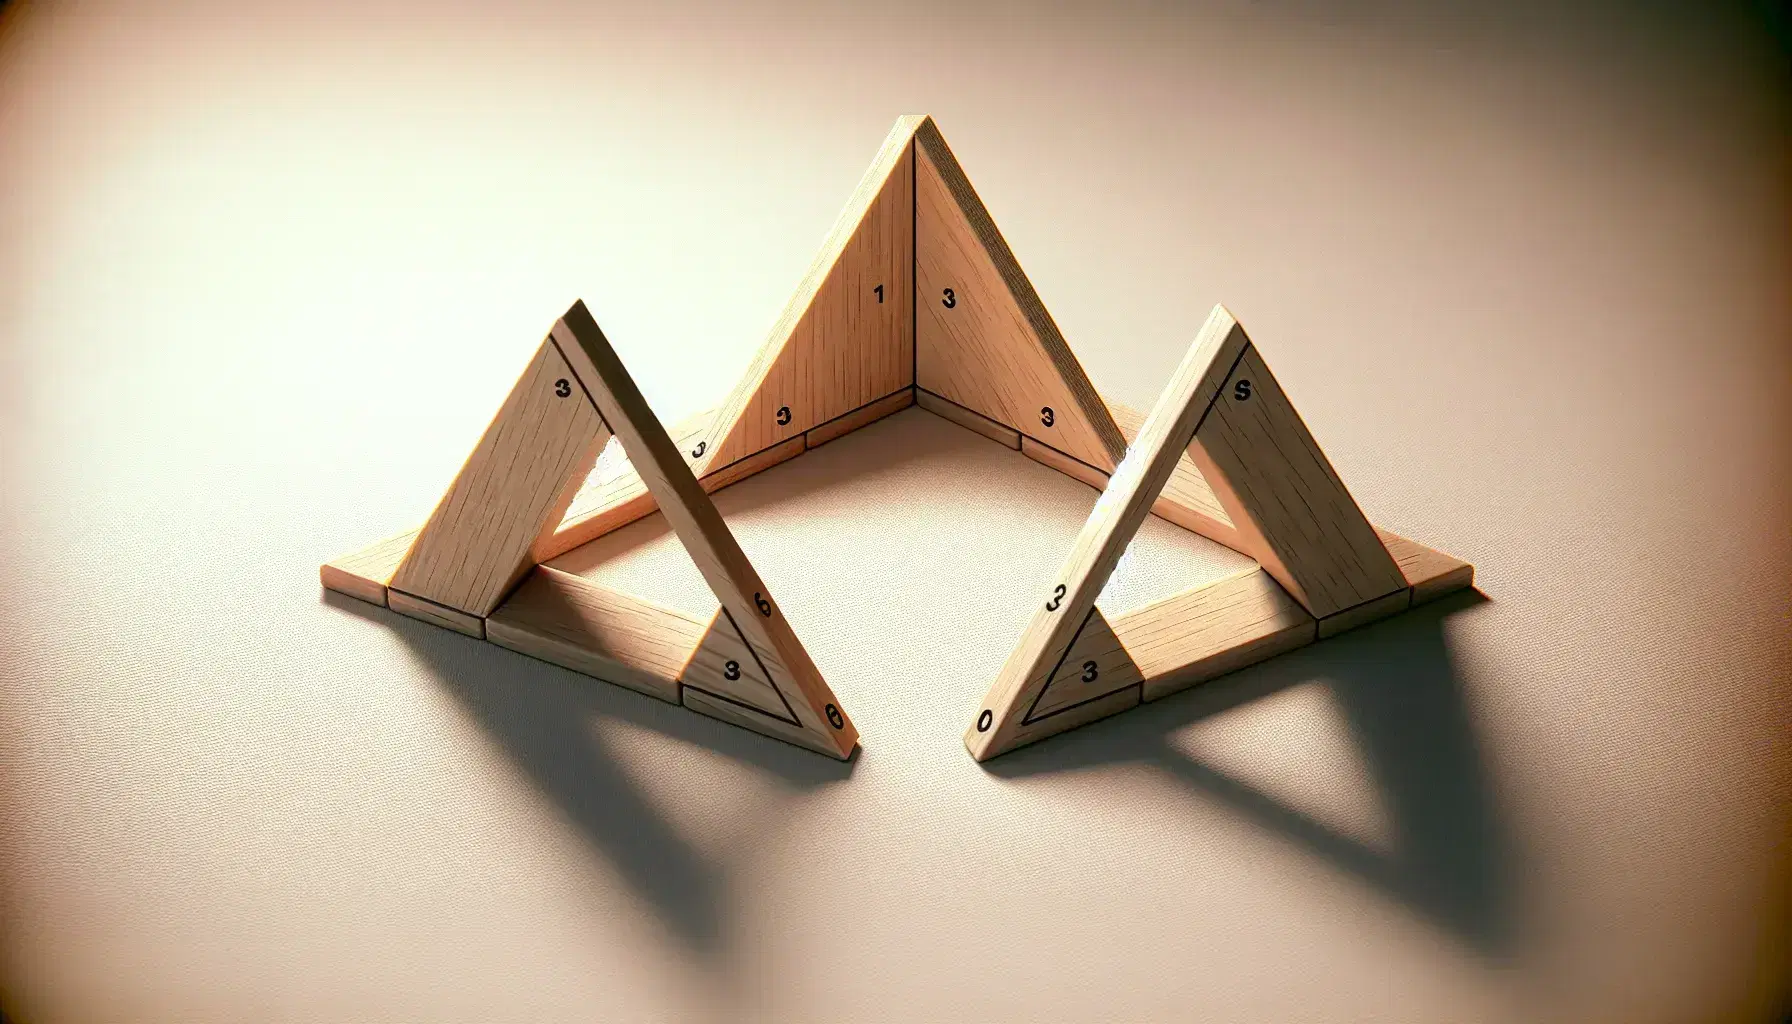 Three pairs of congruent wooden triangles demonstrate SSS and SAS congruence criteria on a light background, with notches and arcs indicating equal sides and angles.